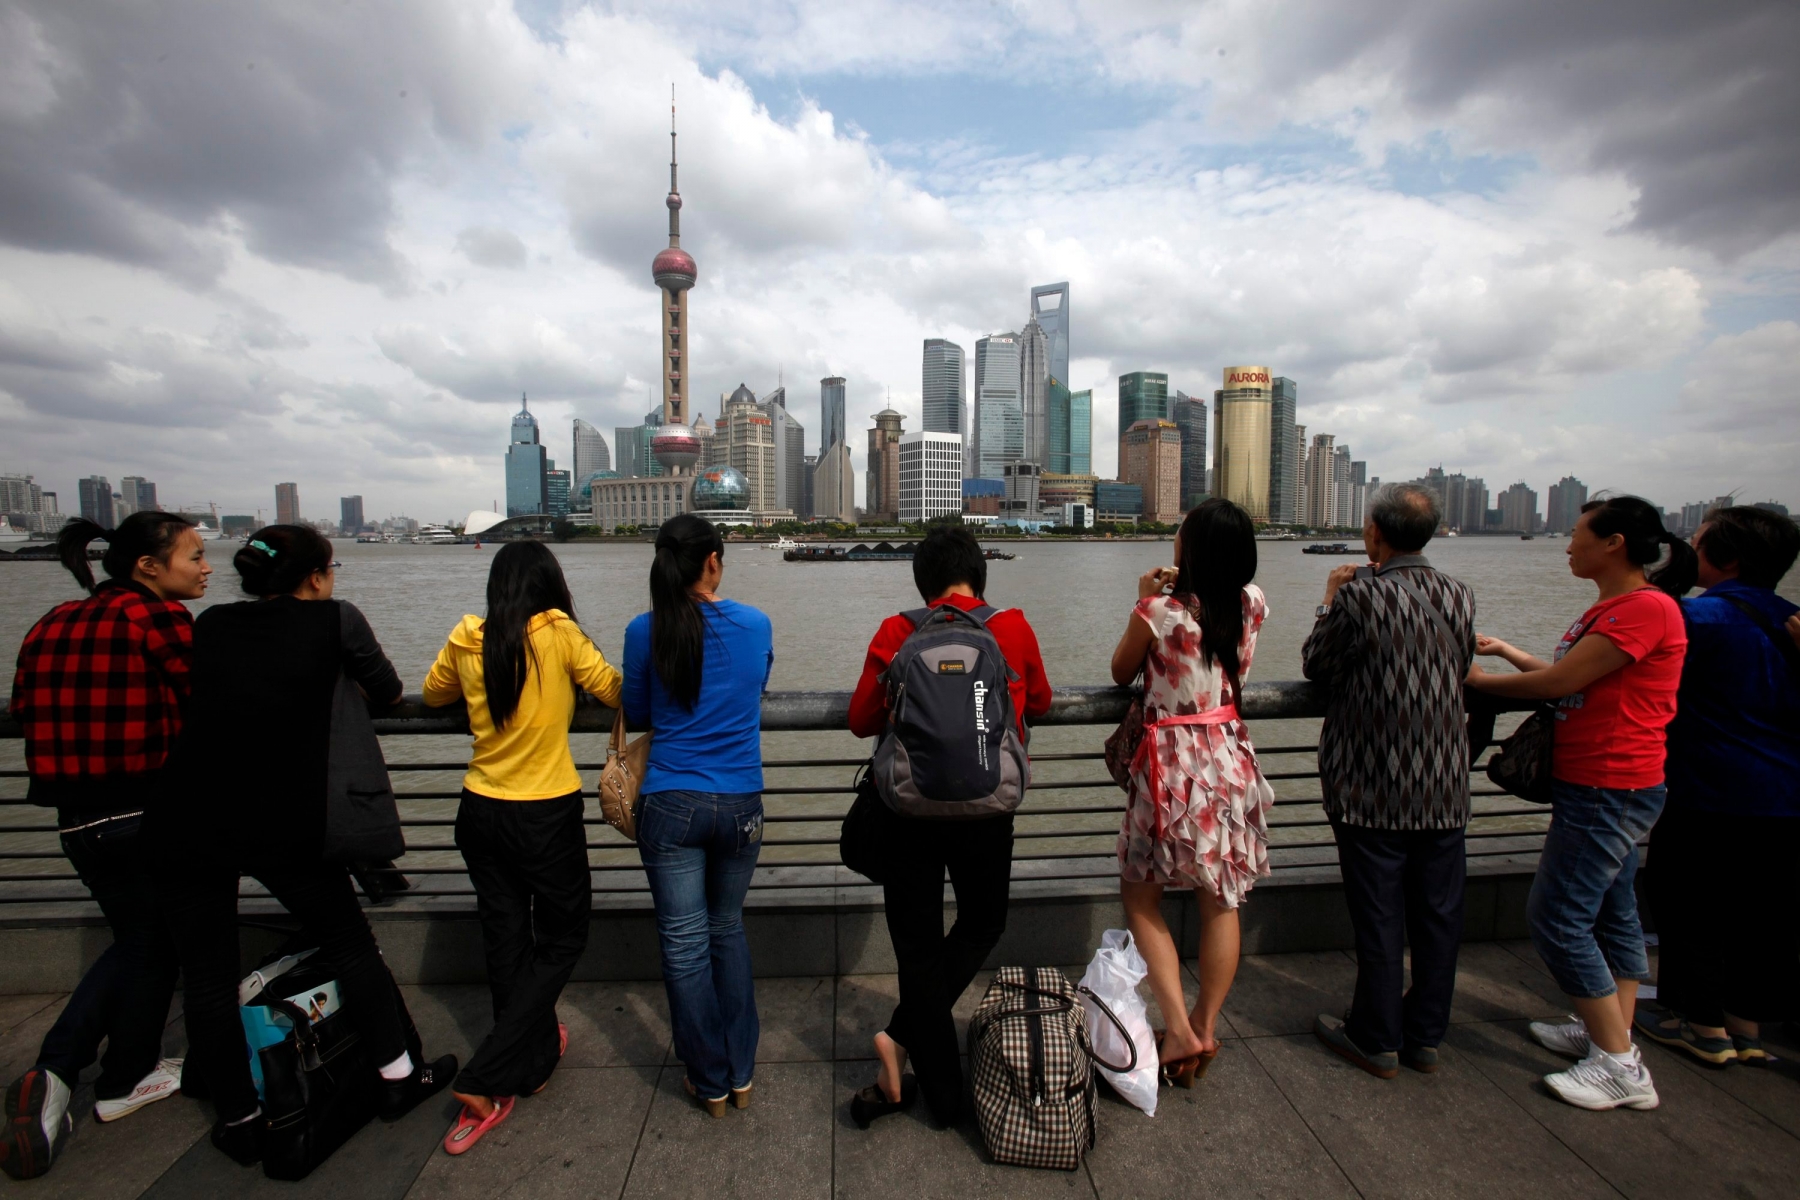 Tourists look at high-rising buildings in Pudong new develop zone in Shanghai, China, Monday, Sept. 19, 2011. (AP Photo/Eugene Hoshiko) China Daily Life